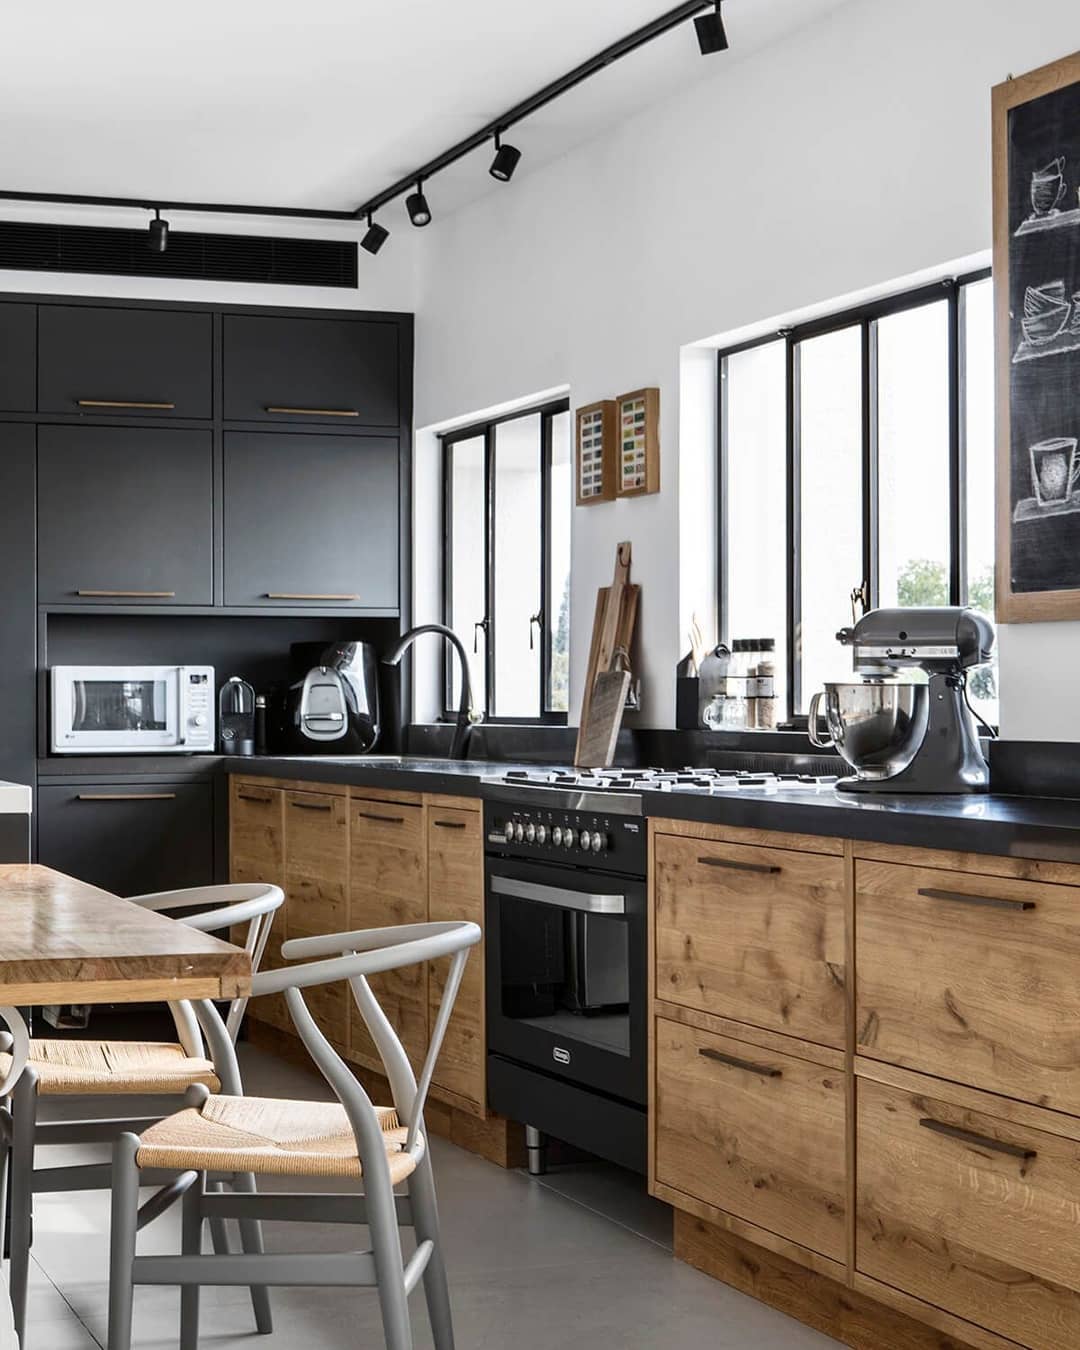 Black and gray and wood kitchen designed in Industrial style. Photo by Instagram use @arpinharutunian